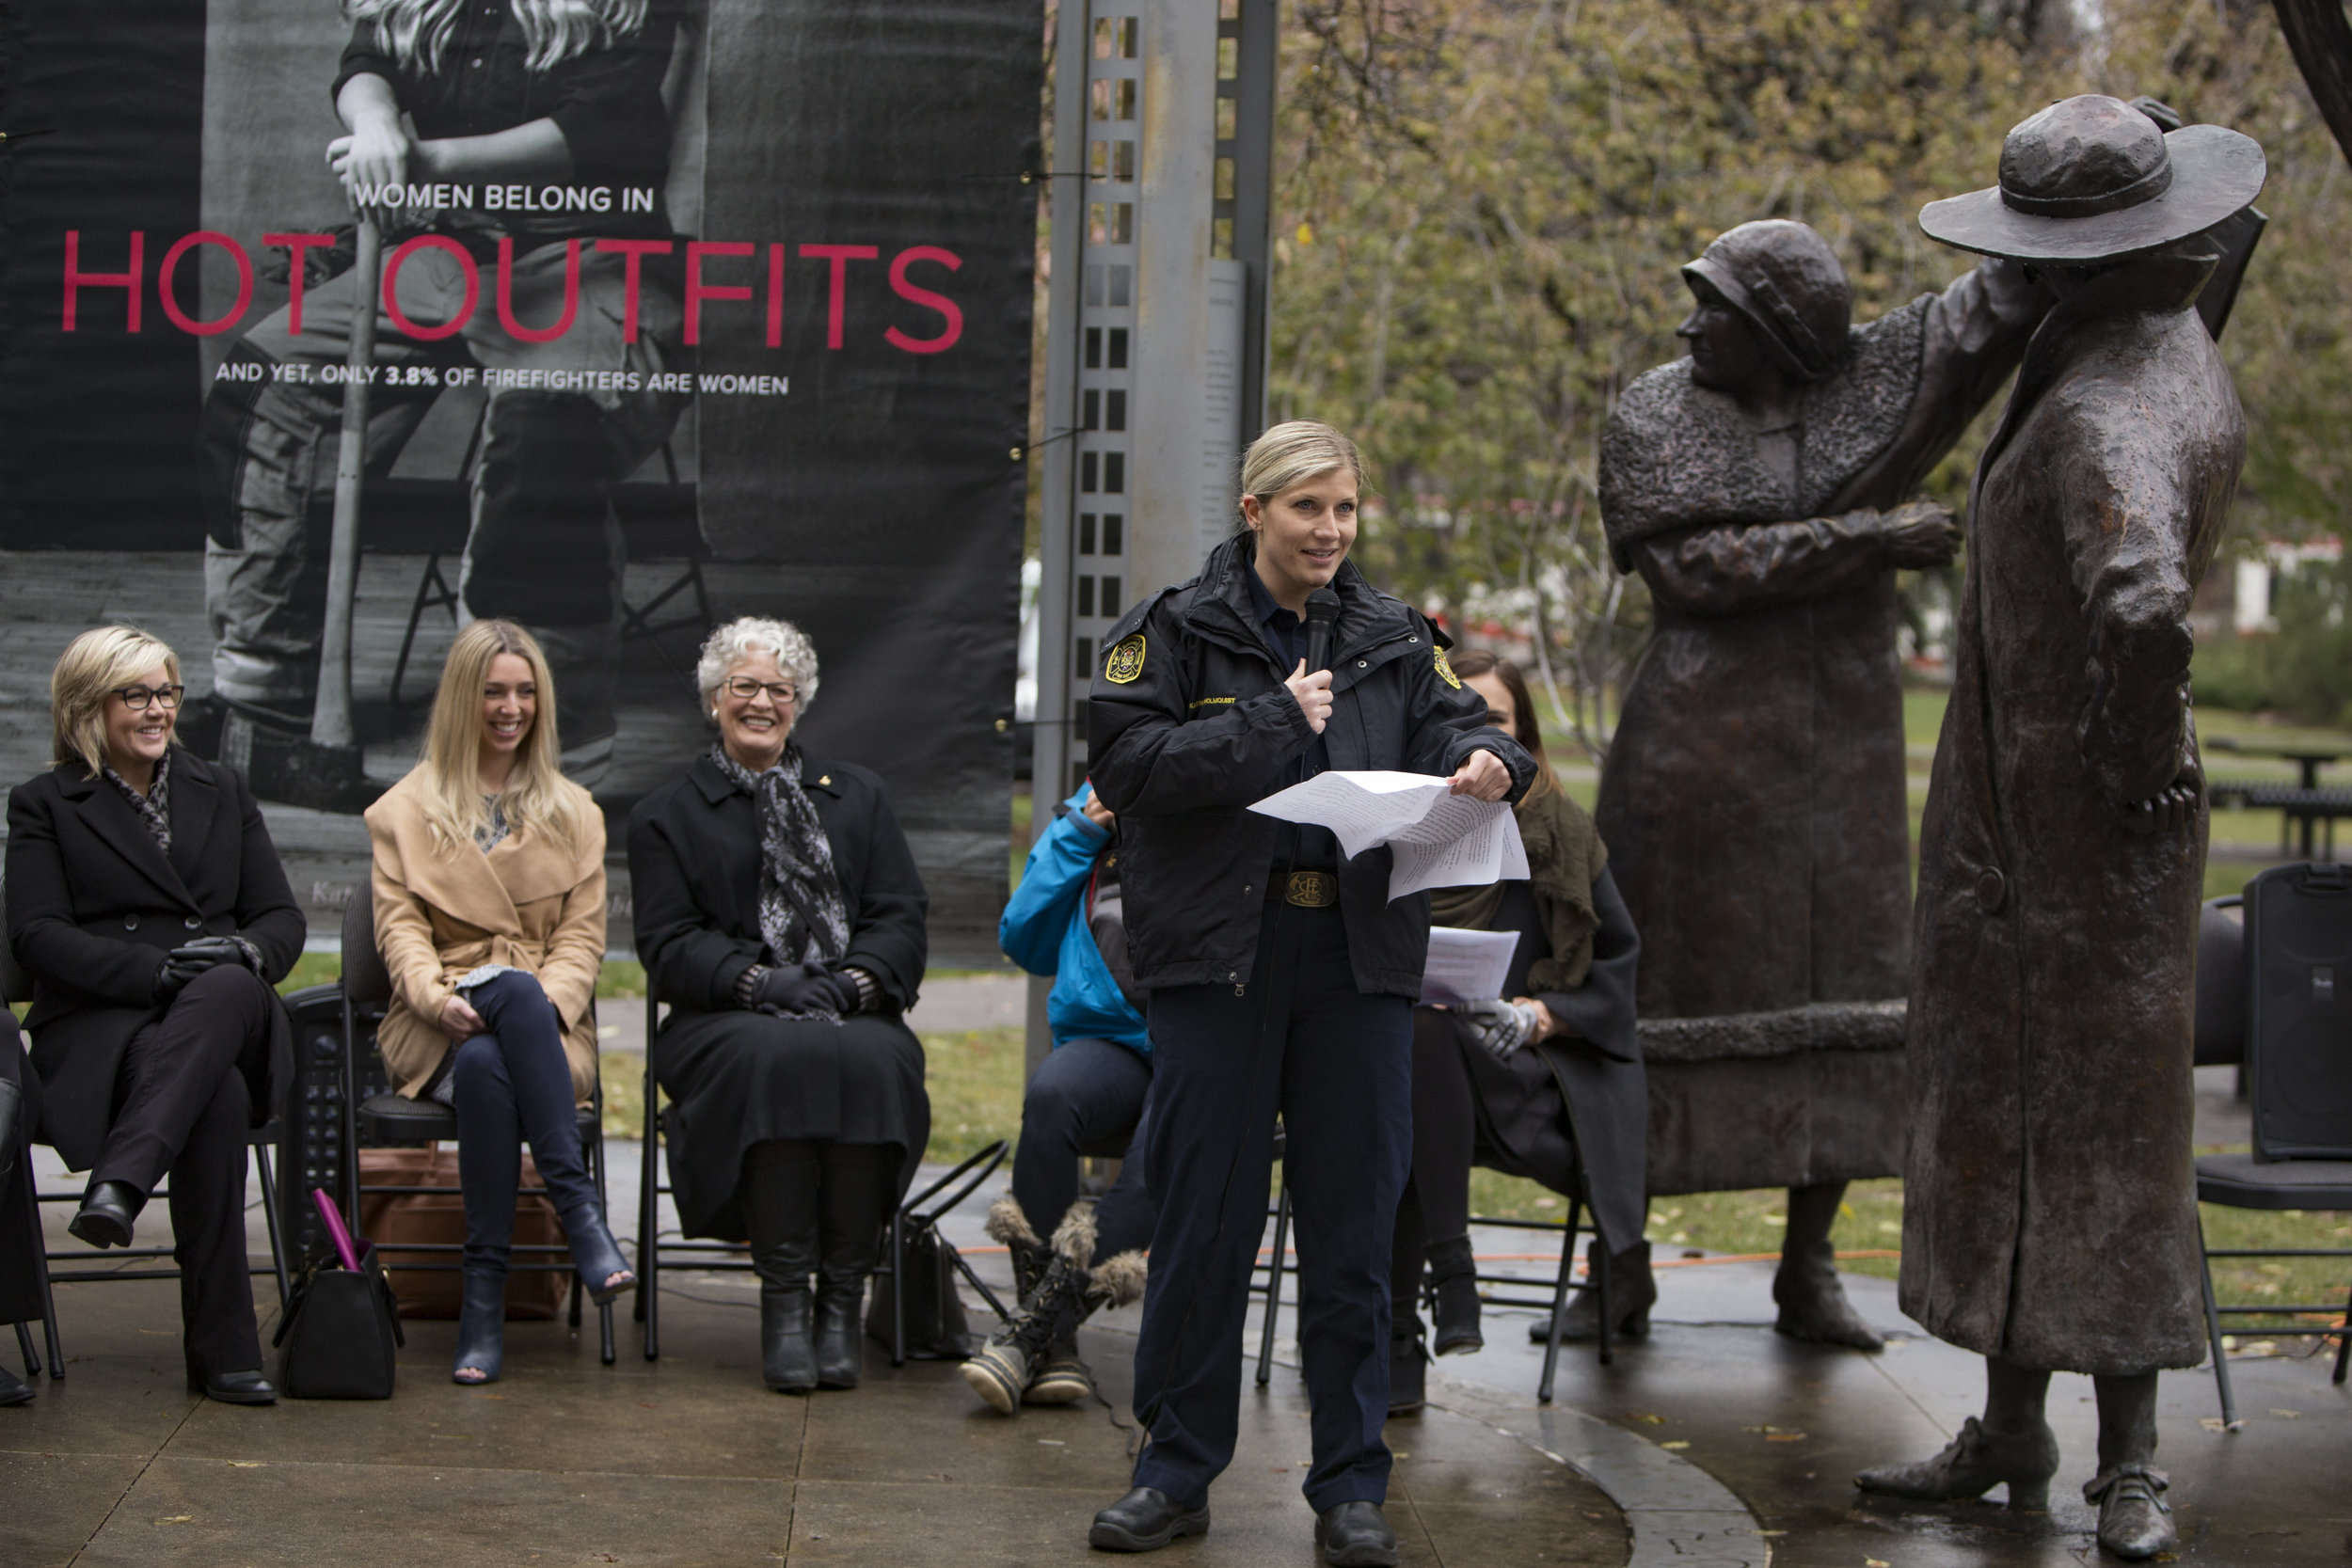  Persons Day event unveiling #WomenBelong campaign at Olympic Plaza in Calgary on Oct 18, 2016 